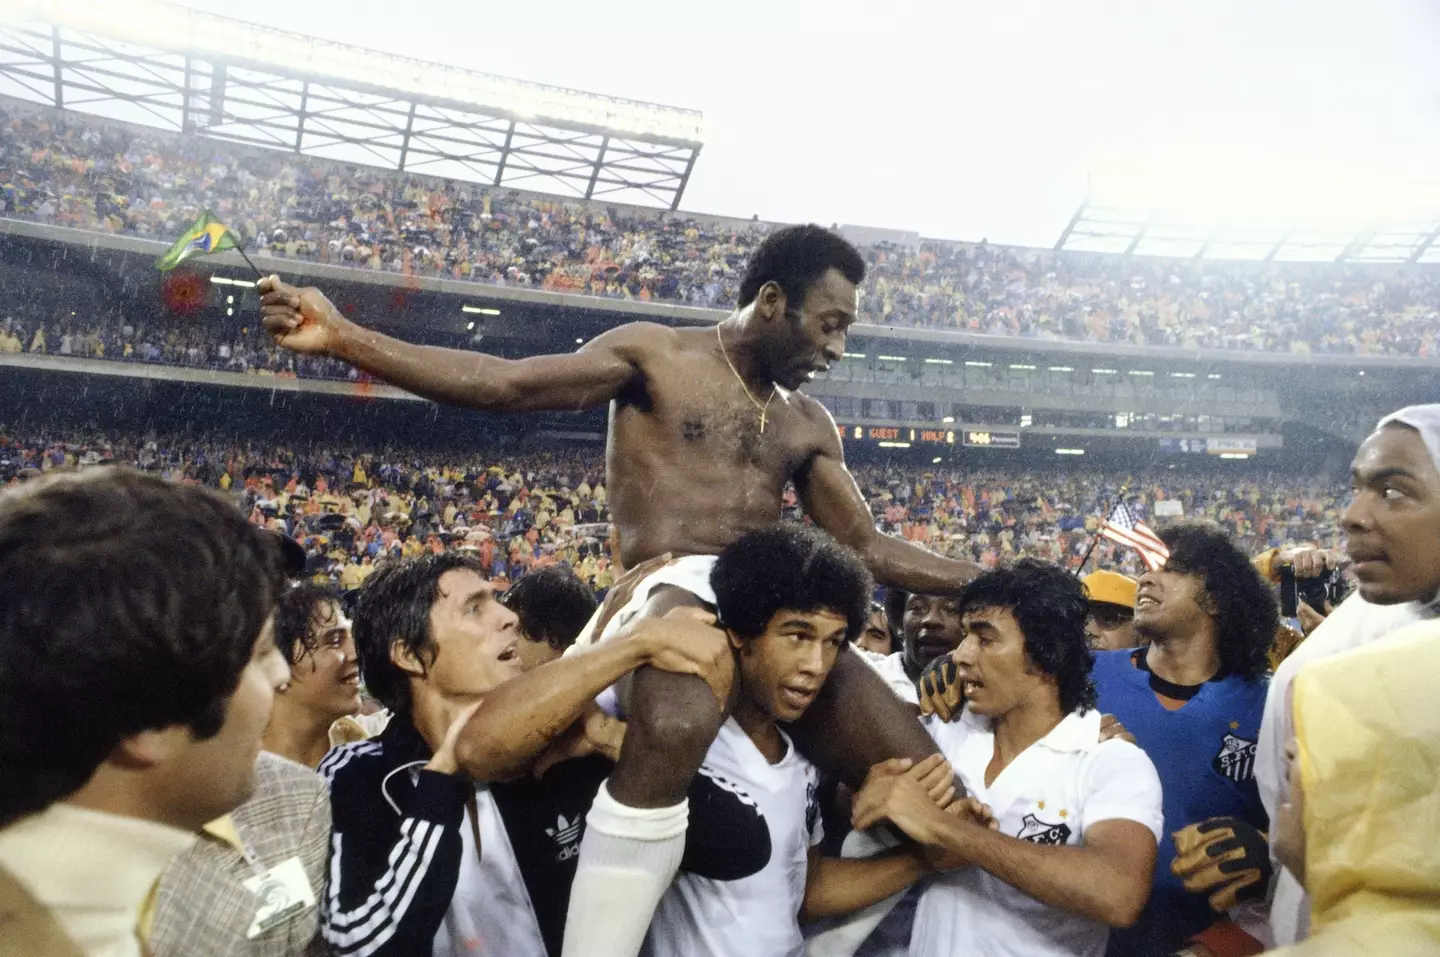 Pele led Brazil to glory during his time playing for them.